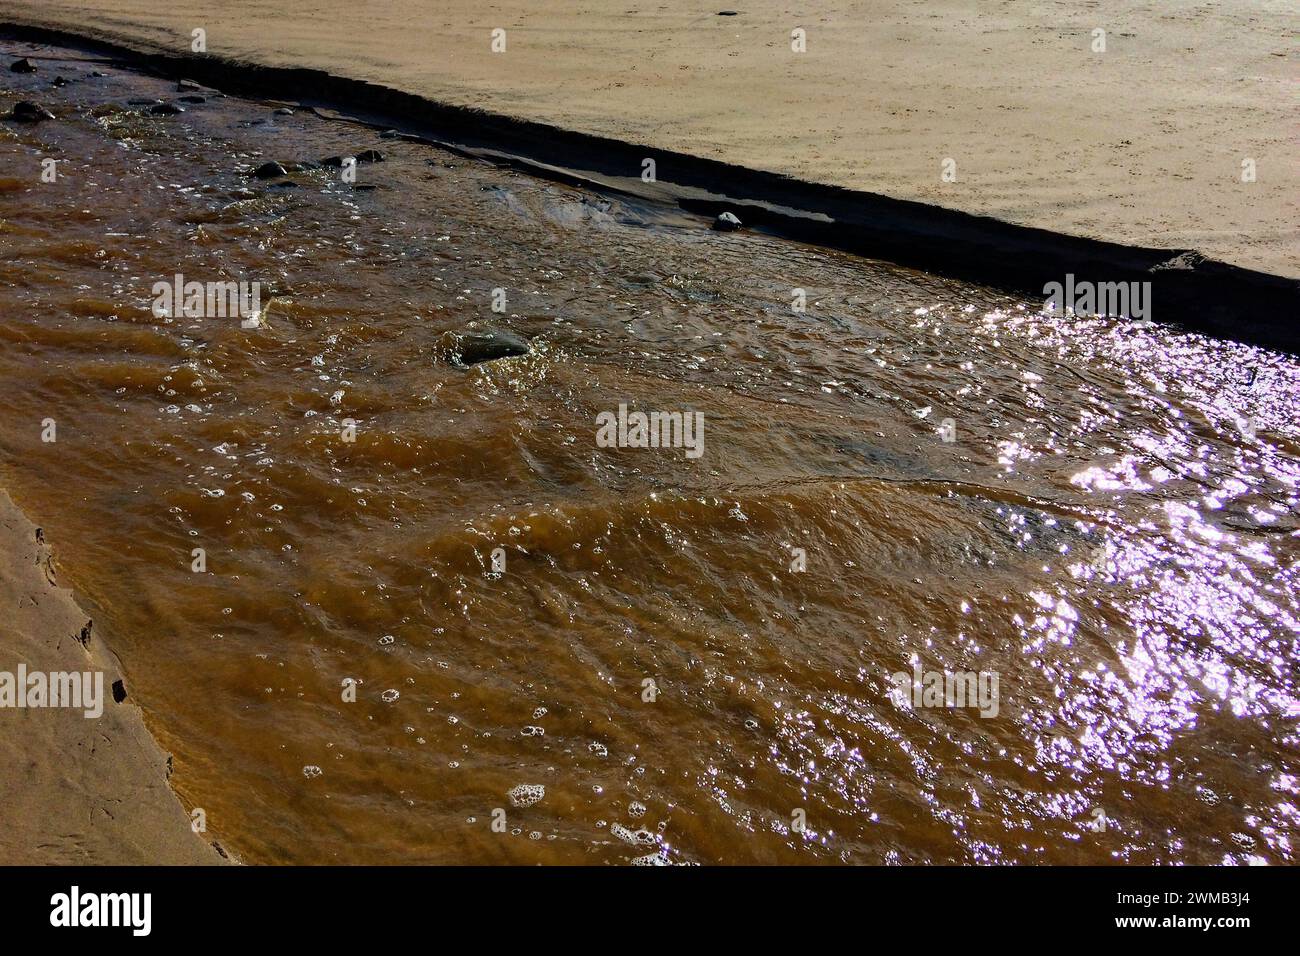 The image captures a muddy stream flowing across a sandy surface, with sunlight reflecting off the wet mud and water. Stock Photo